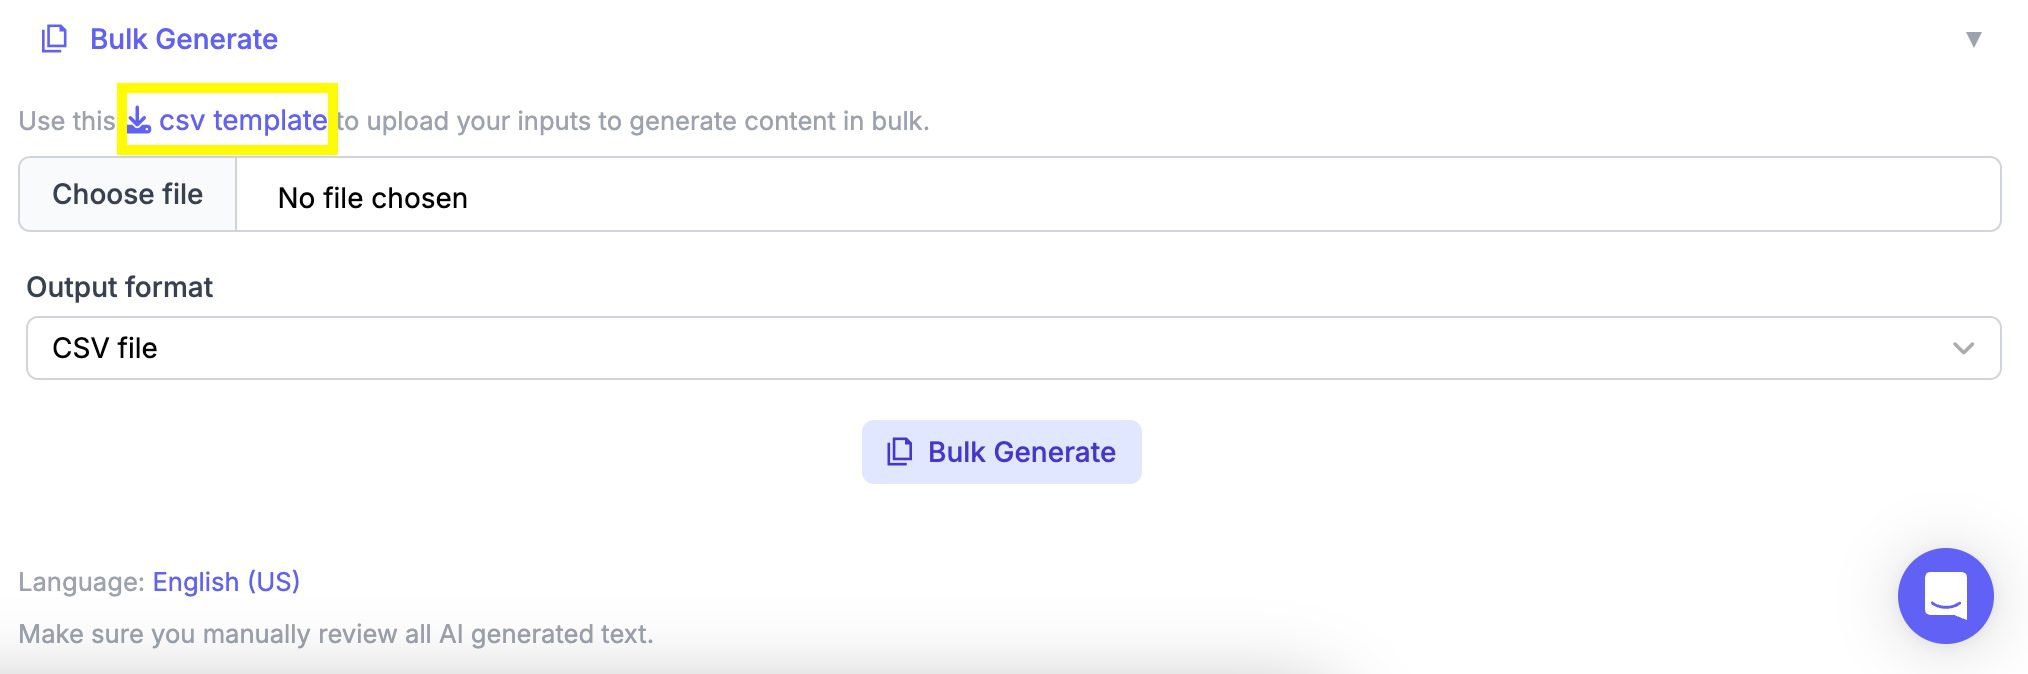 Downloading the CSV template for bulk content generation